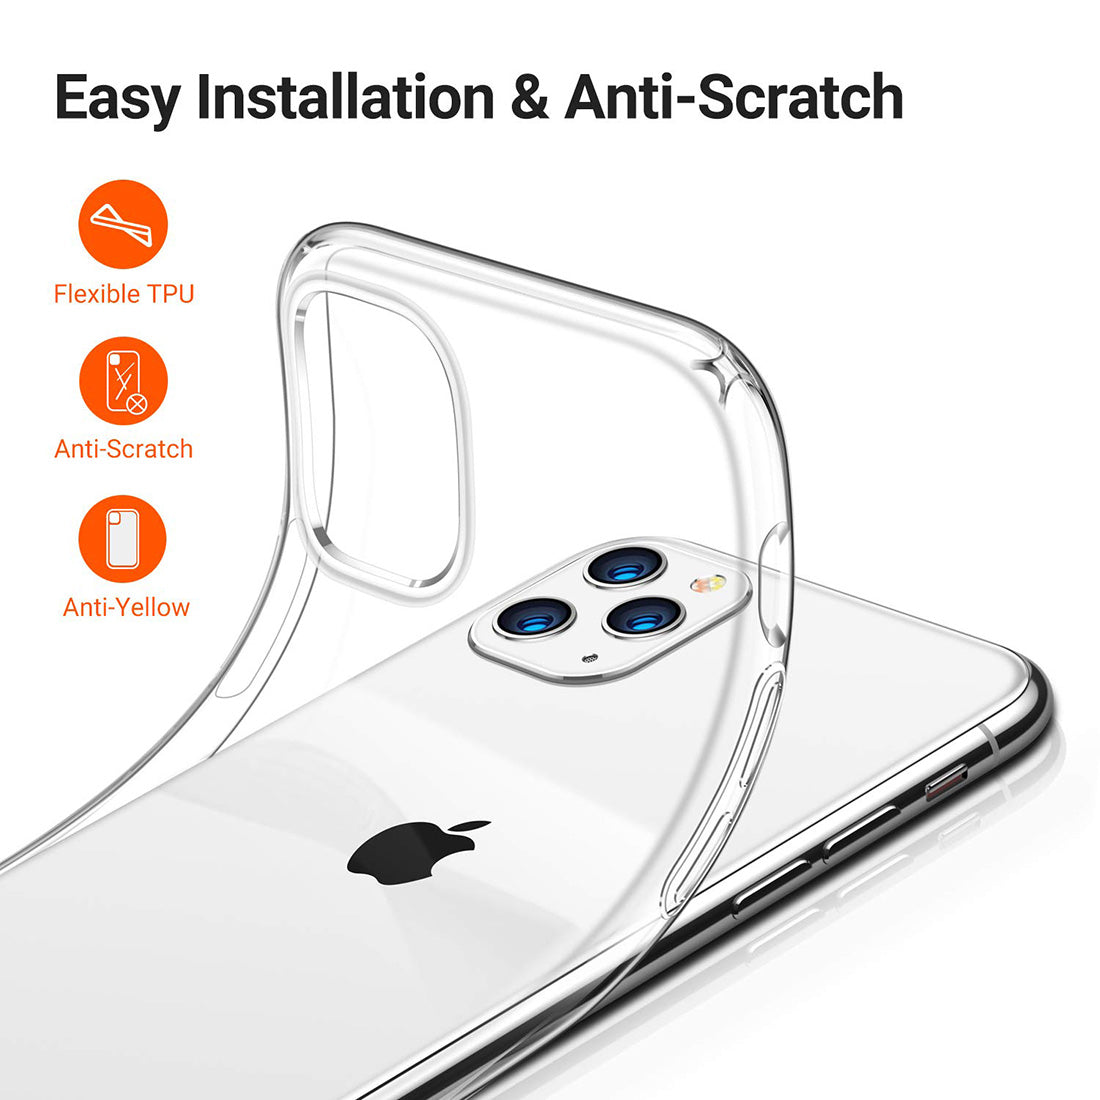 Clear Case for Apple iPhone 11 Pro Max